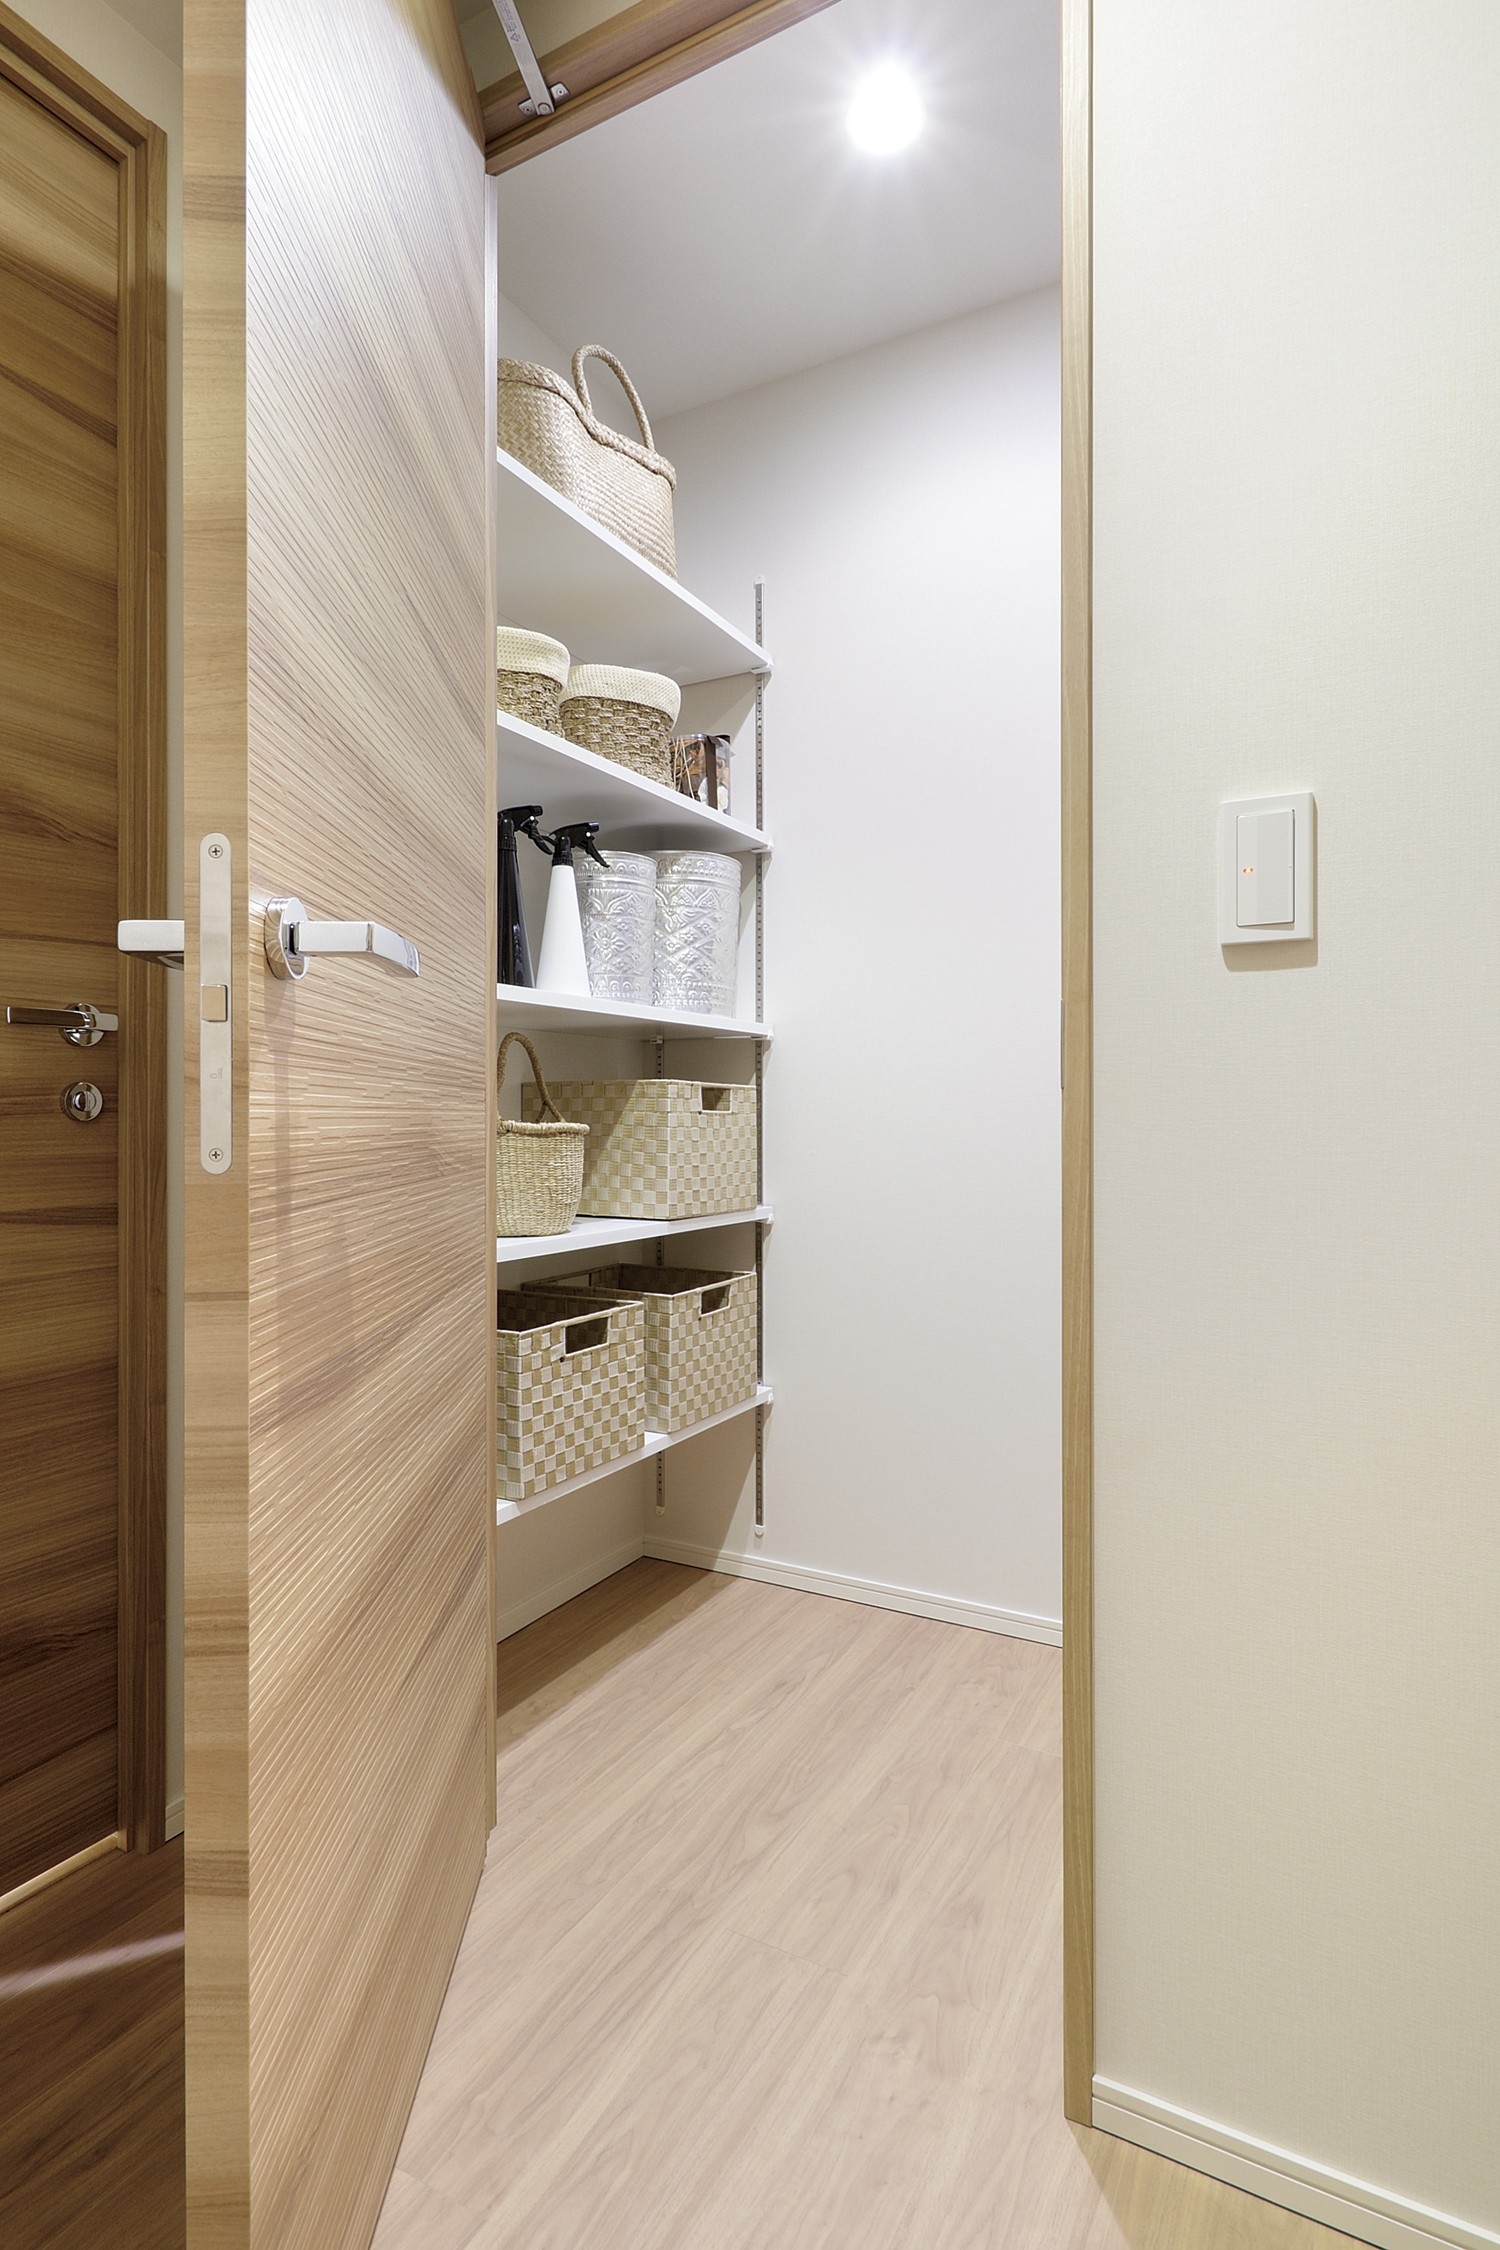 Convenient storage of large ones such as cleaning equipment and trunk closet